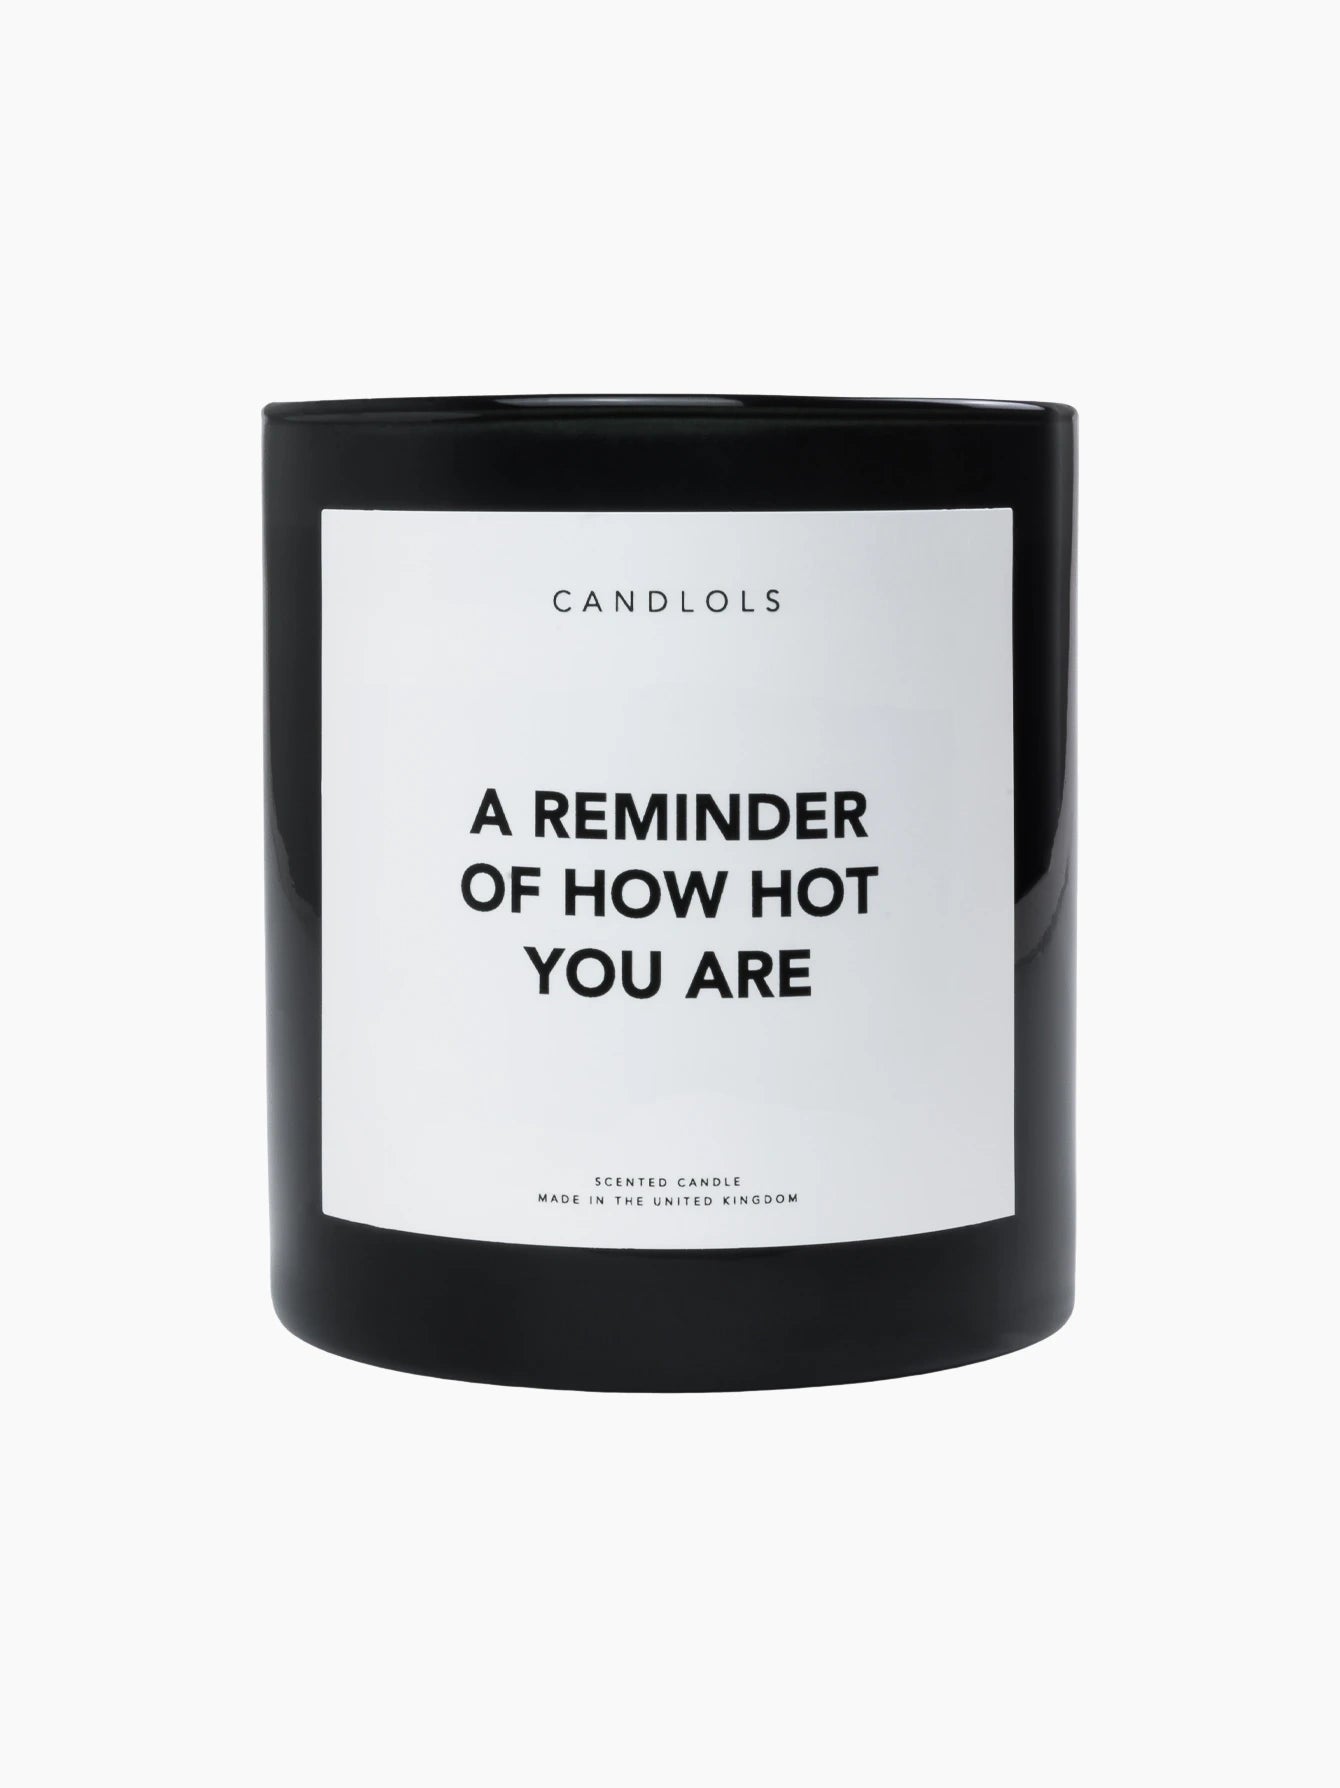 A Reminder of How Hot You Are